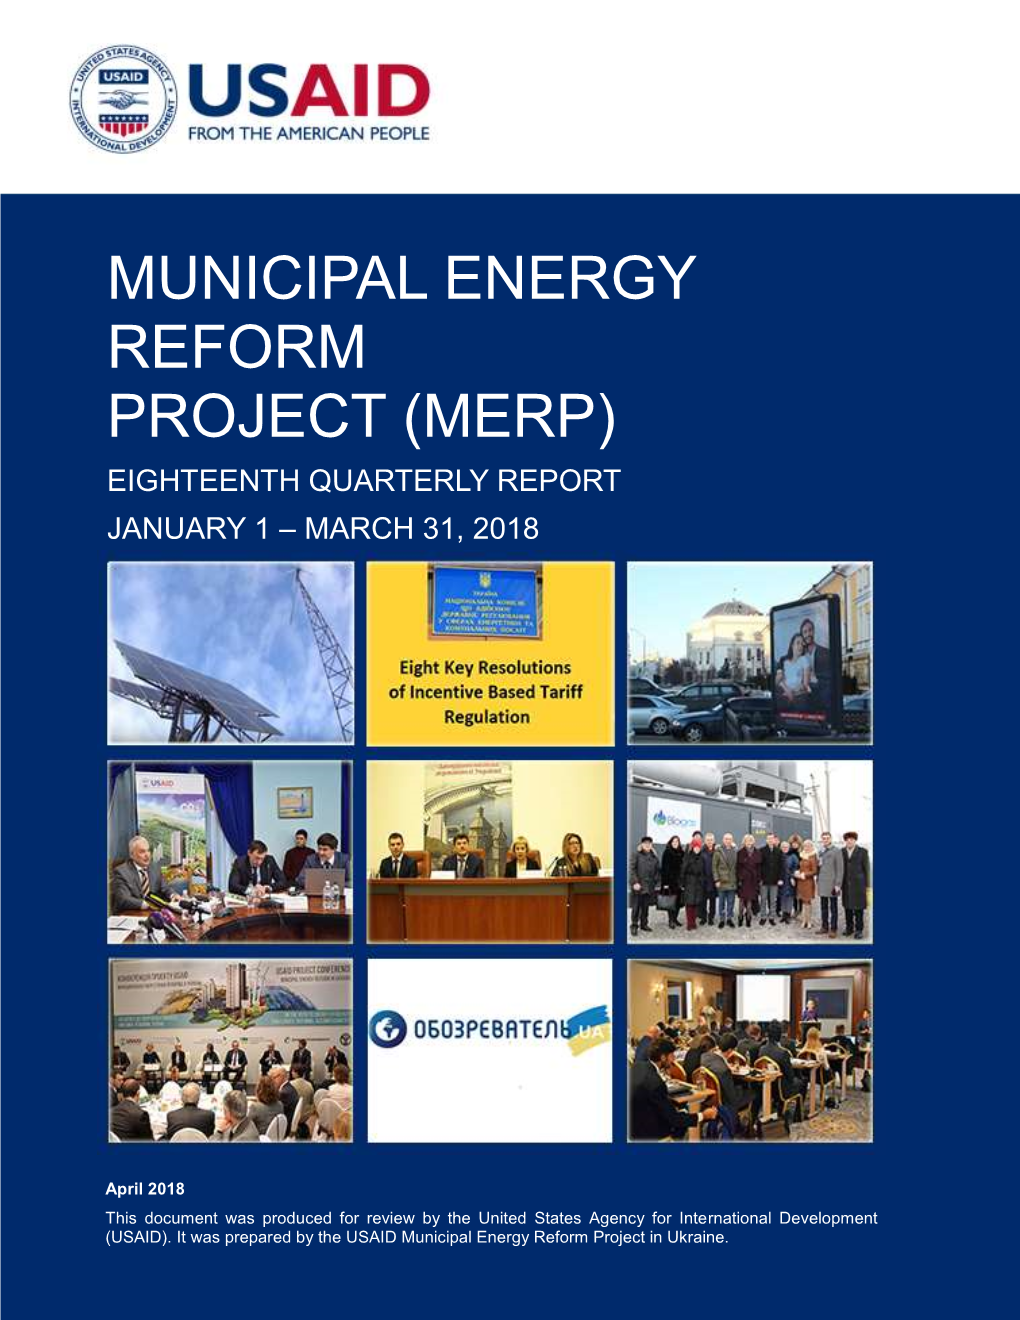 Municipal Energy Reform Project (Merp) Eighteenth Quarterly Report January 1 – March 31, 2018